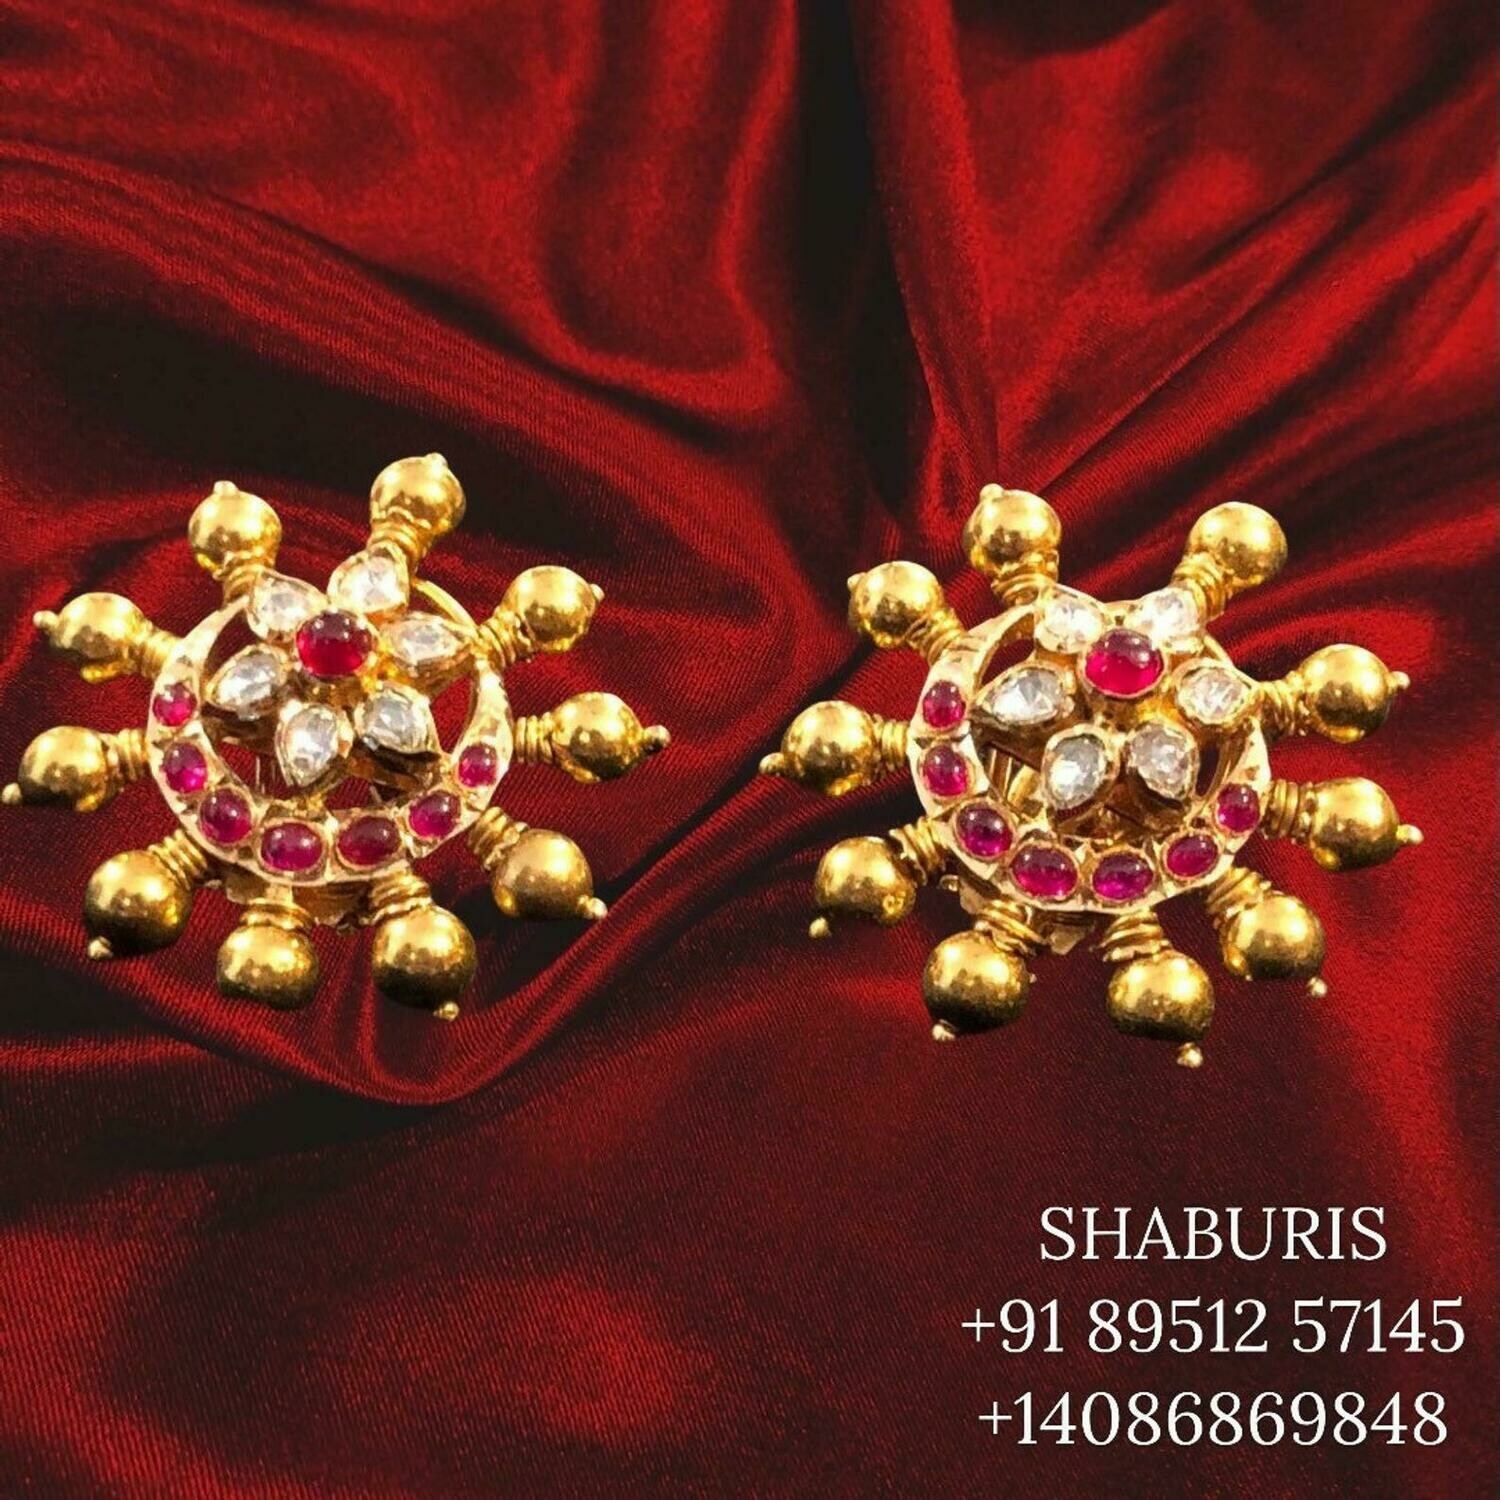 Pure Silver Jewellery Indian,Big Indian Studs,Moissanite Studs,Indian Bridal,Indian Wedding Jewelry,pure Silver jewelry-NIHIRA-SHABURIS